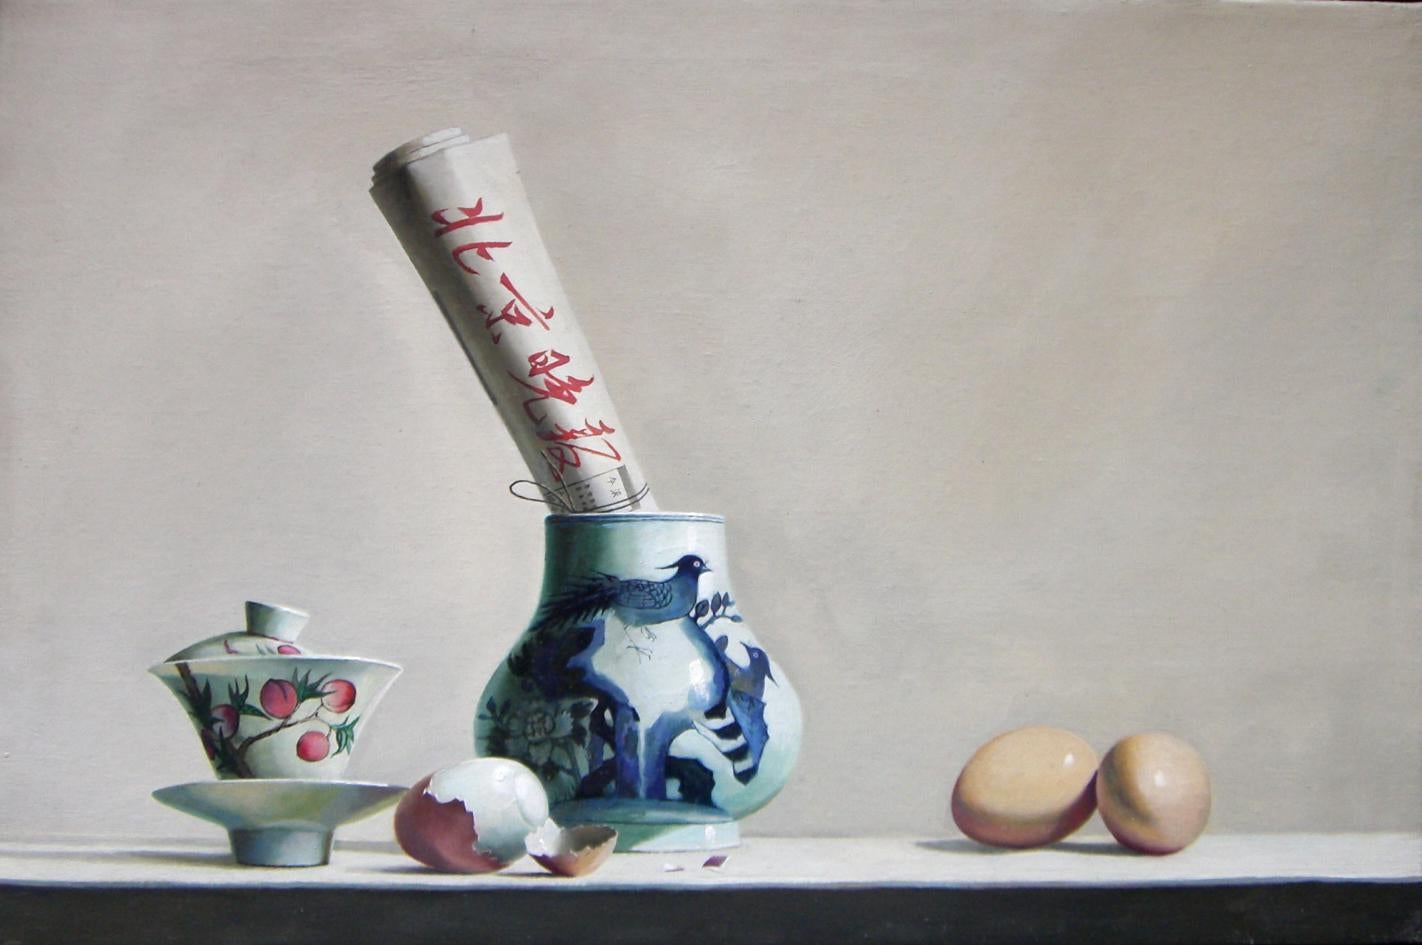 Breakfast is an original oil on canvas realized by the chinese painter Zhang Wei Guang (Mirror) in 2007.
Excellent conditions.

Zhang Wei Guang, also called ‘mirror' was born in Helong Jang, China in 1968. He studied at the Haierbin Teacher